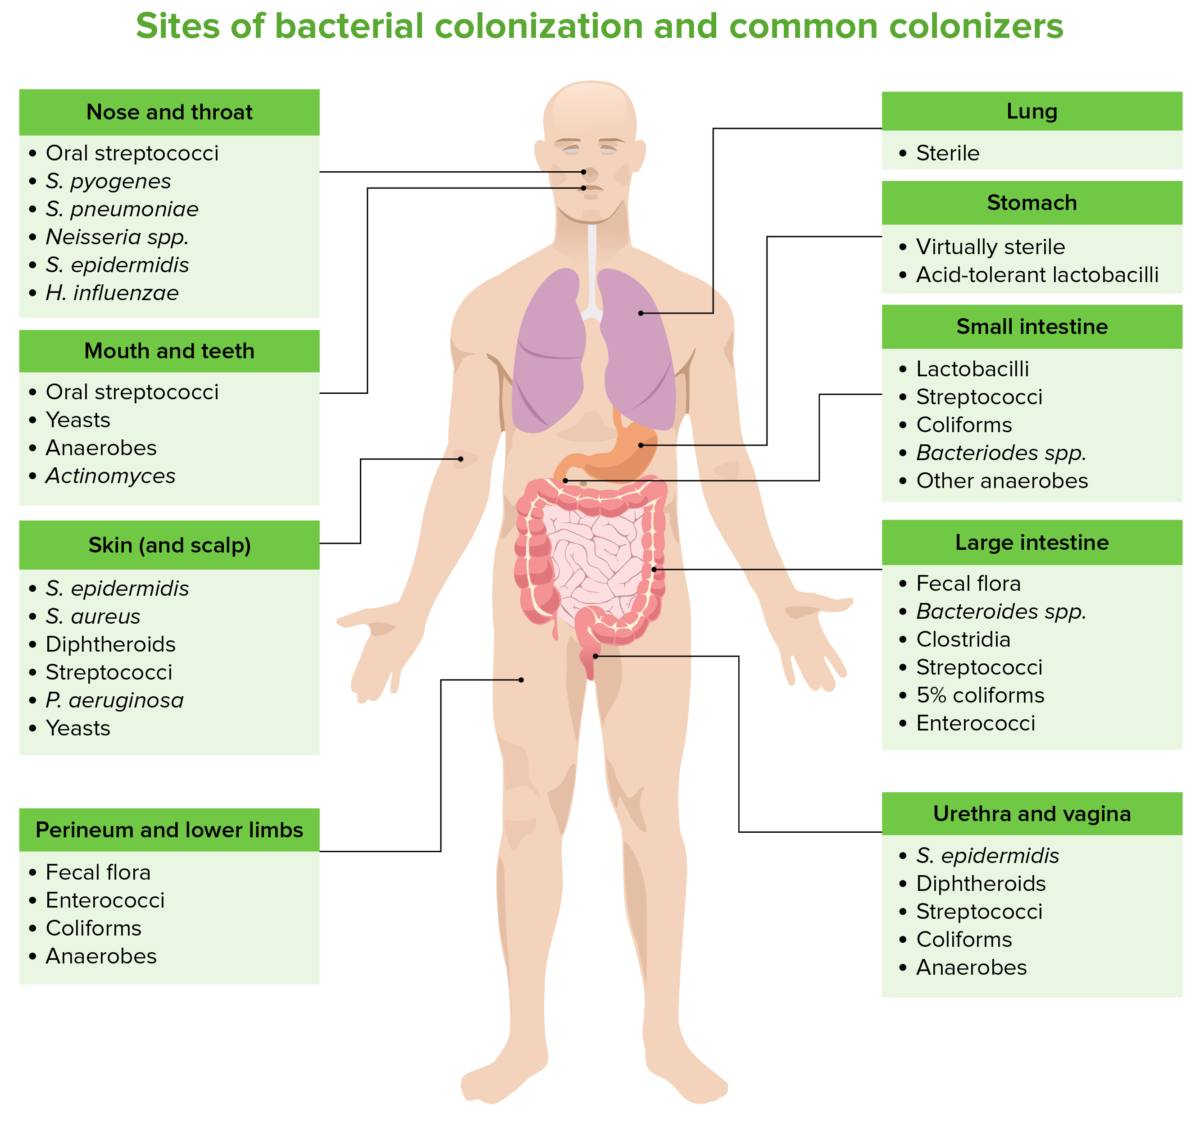 Sites of bacterial colonization